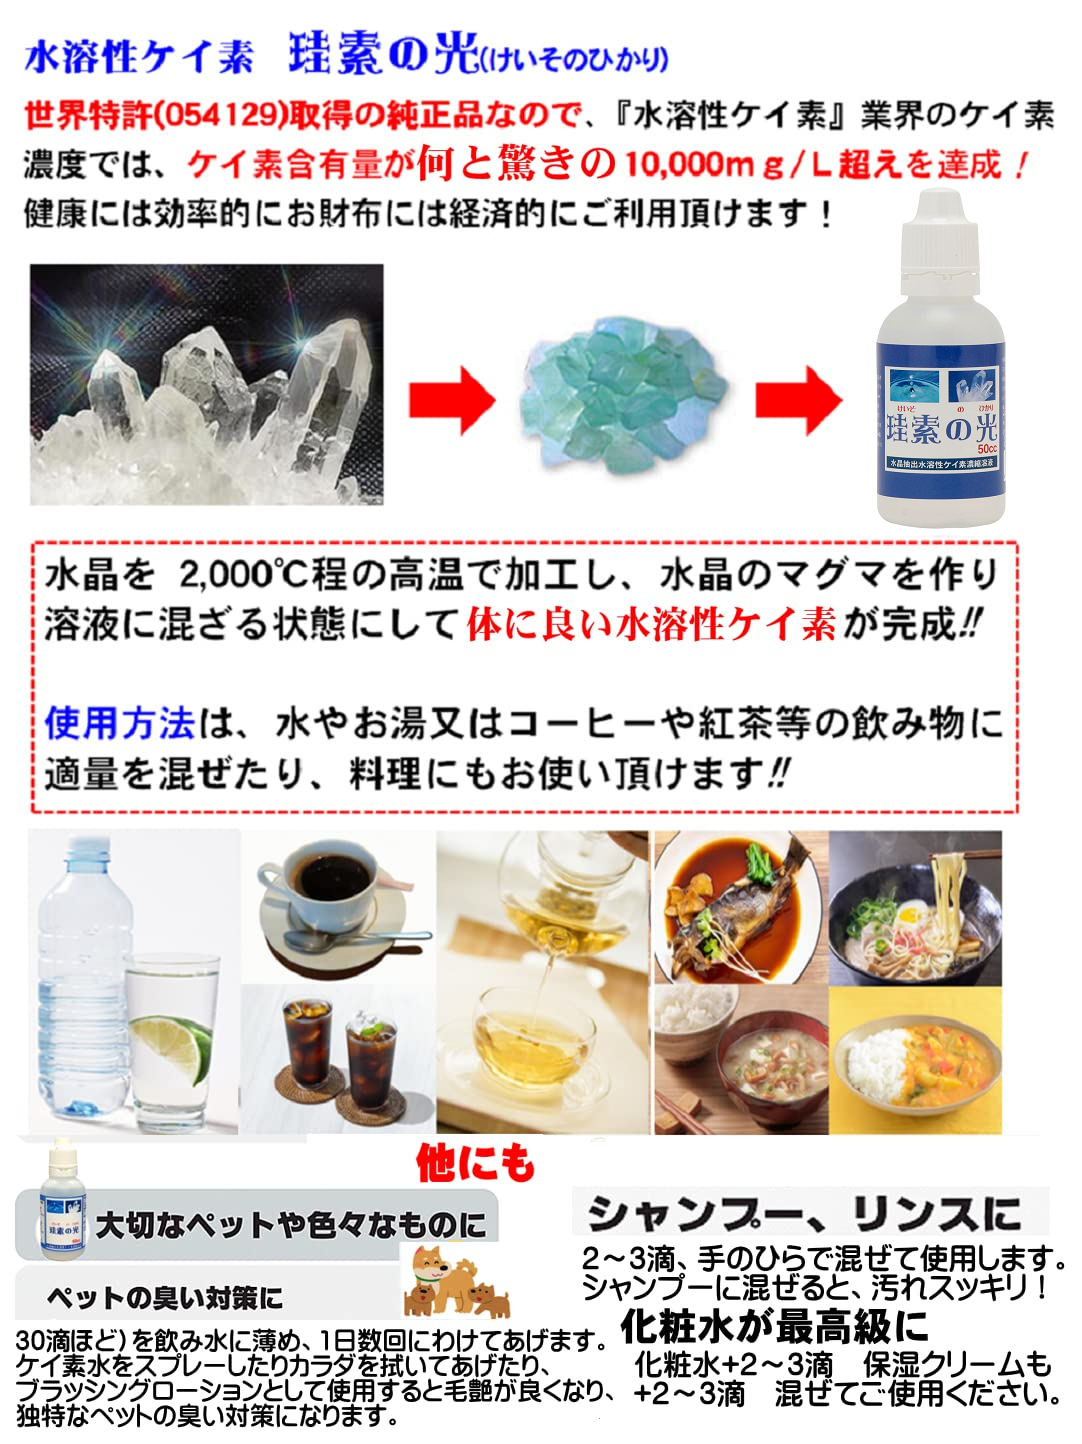 [ patent (special permission) acquisition. regular goods ] high density water .. Kei element . element. light 2 pcs set 4900 jpy Kei element ... fluid patent (special permission) made law Kei element concentration 10,000ppm super mineral .. made in Japan free shipping!